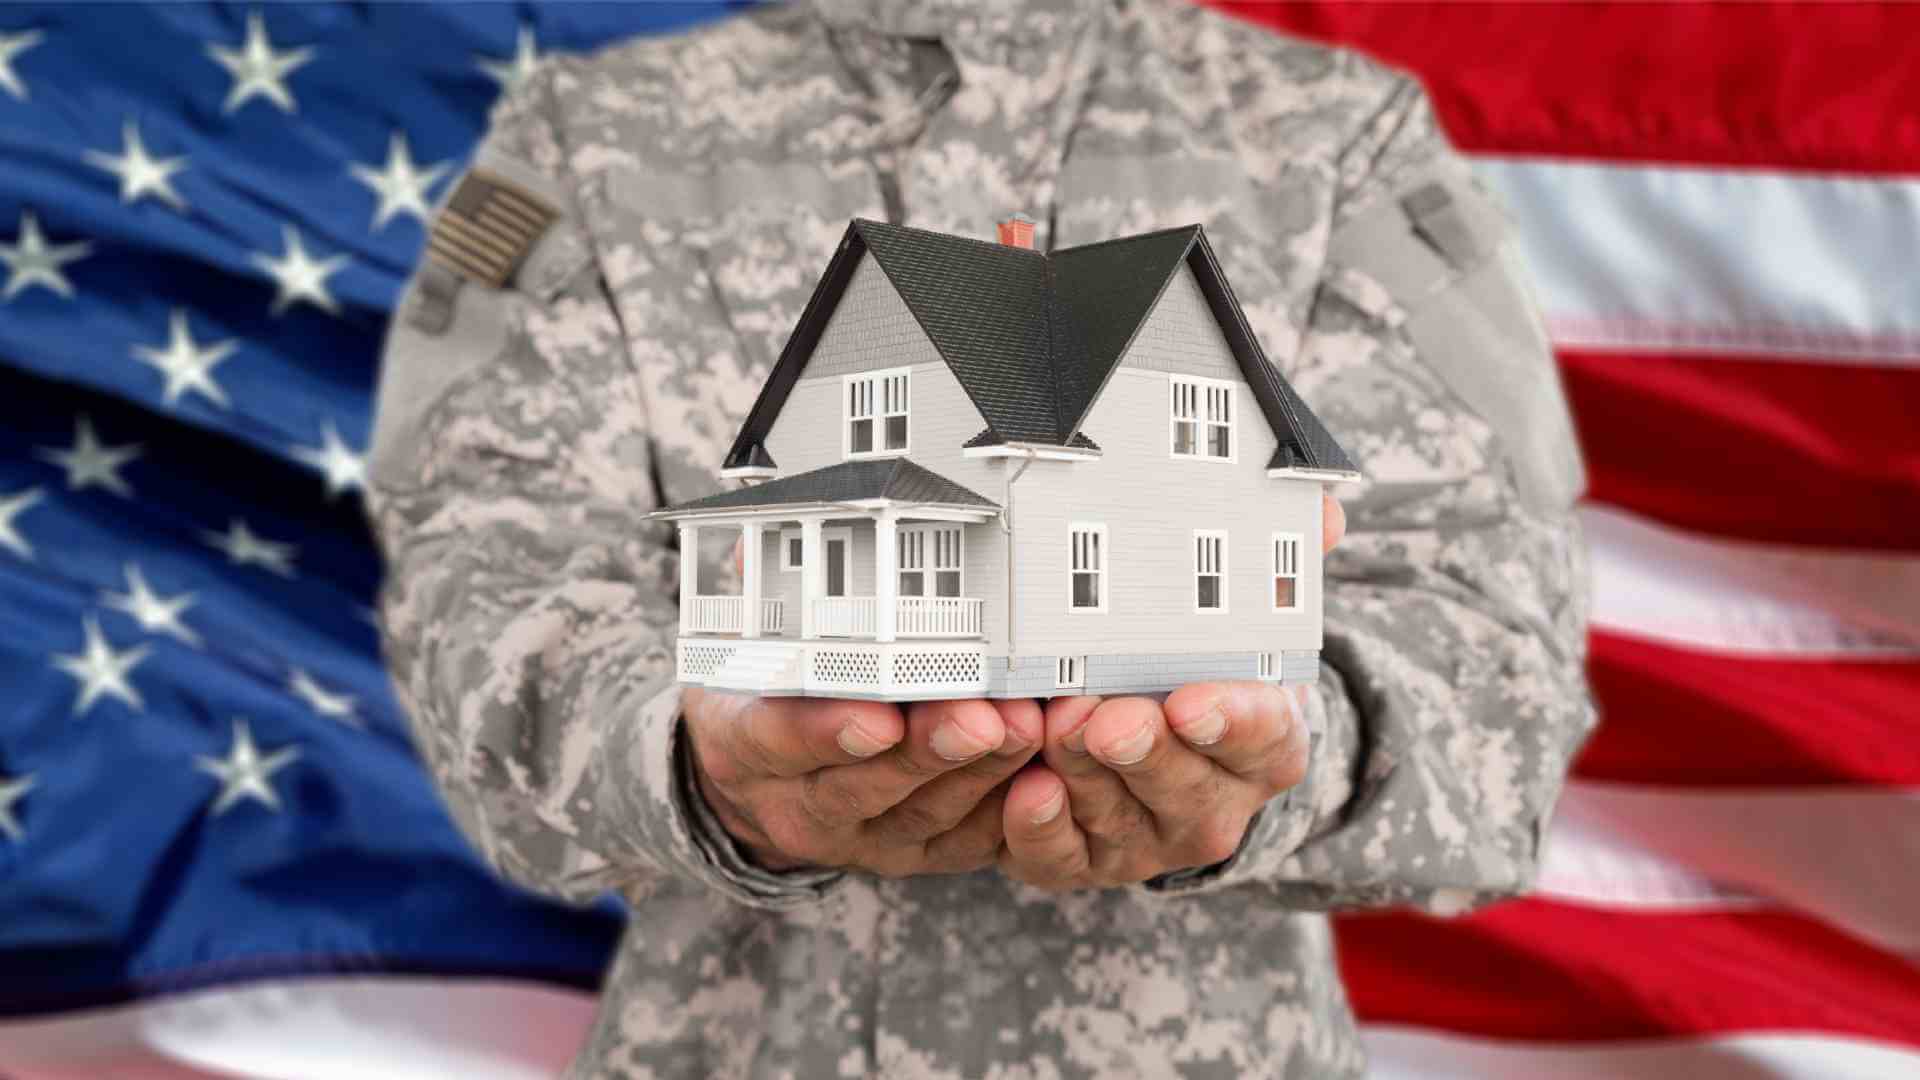 A soldier holds up a small house in front of an American Flag. The home and flag represent the process of obtaining home financing through a VA loan and closing on a new home purchase.